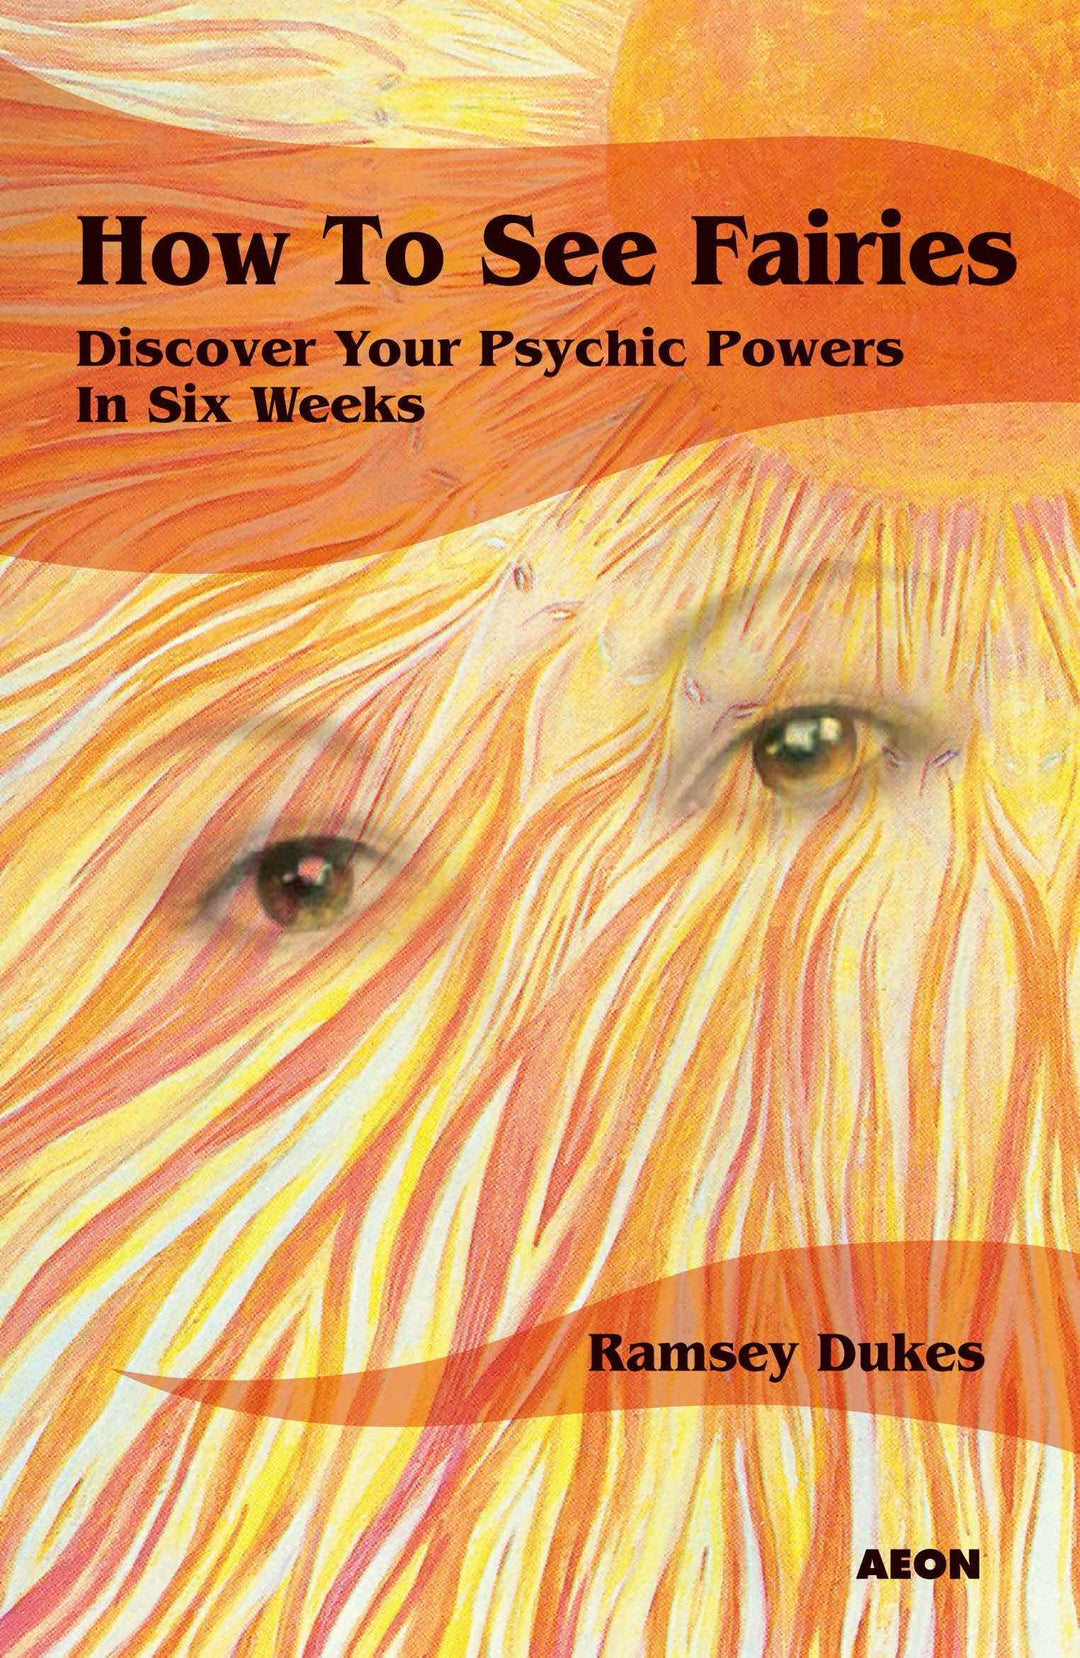 How to See Fairies: Discover your Psychic Powers in Six Weekss by Ramsey Dukes